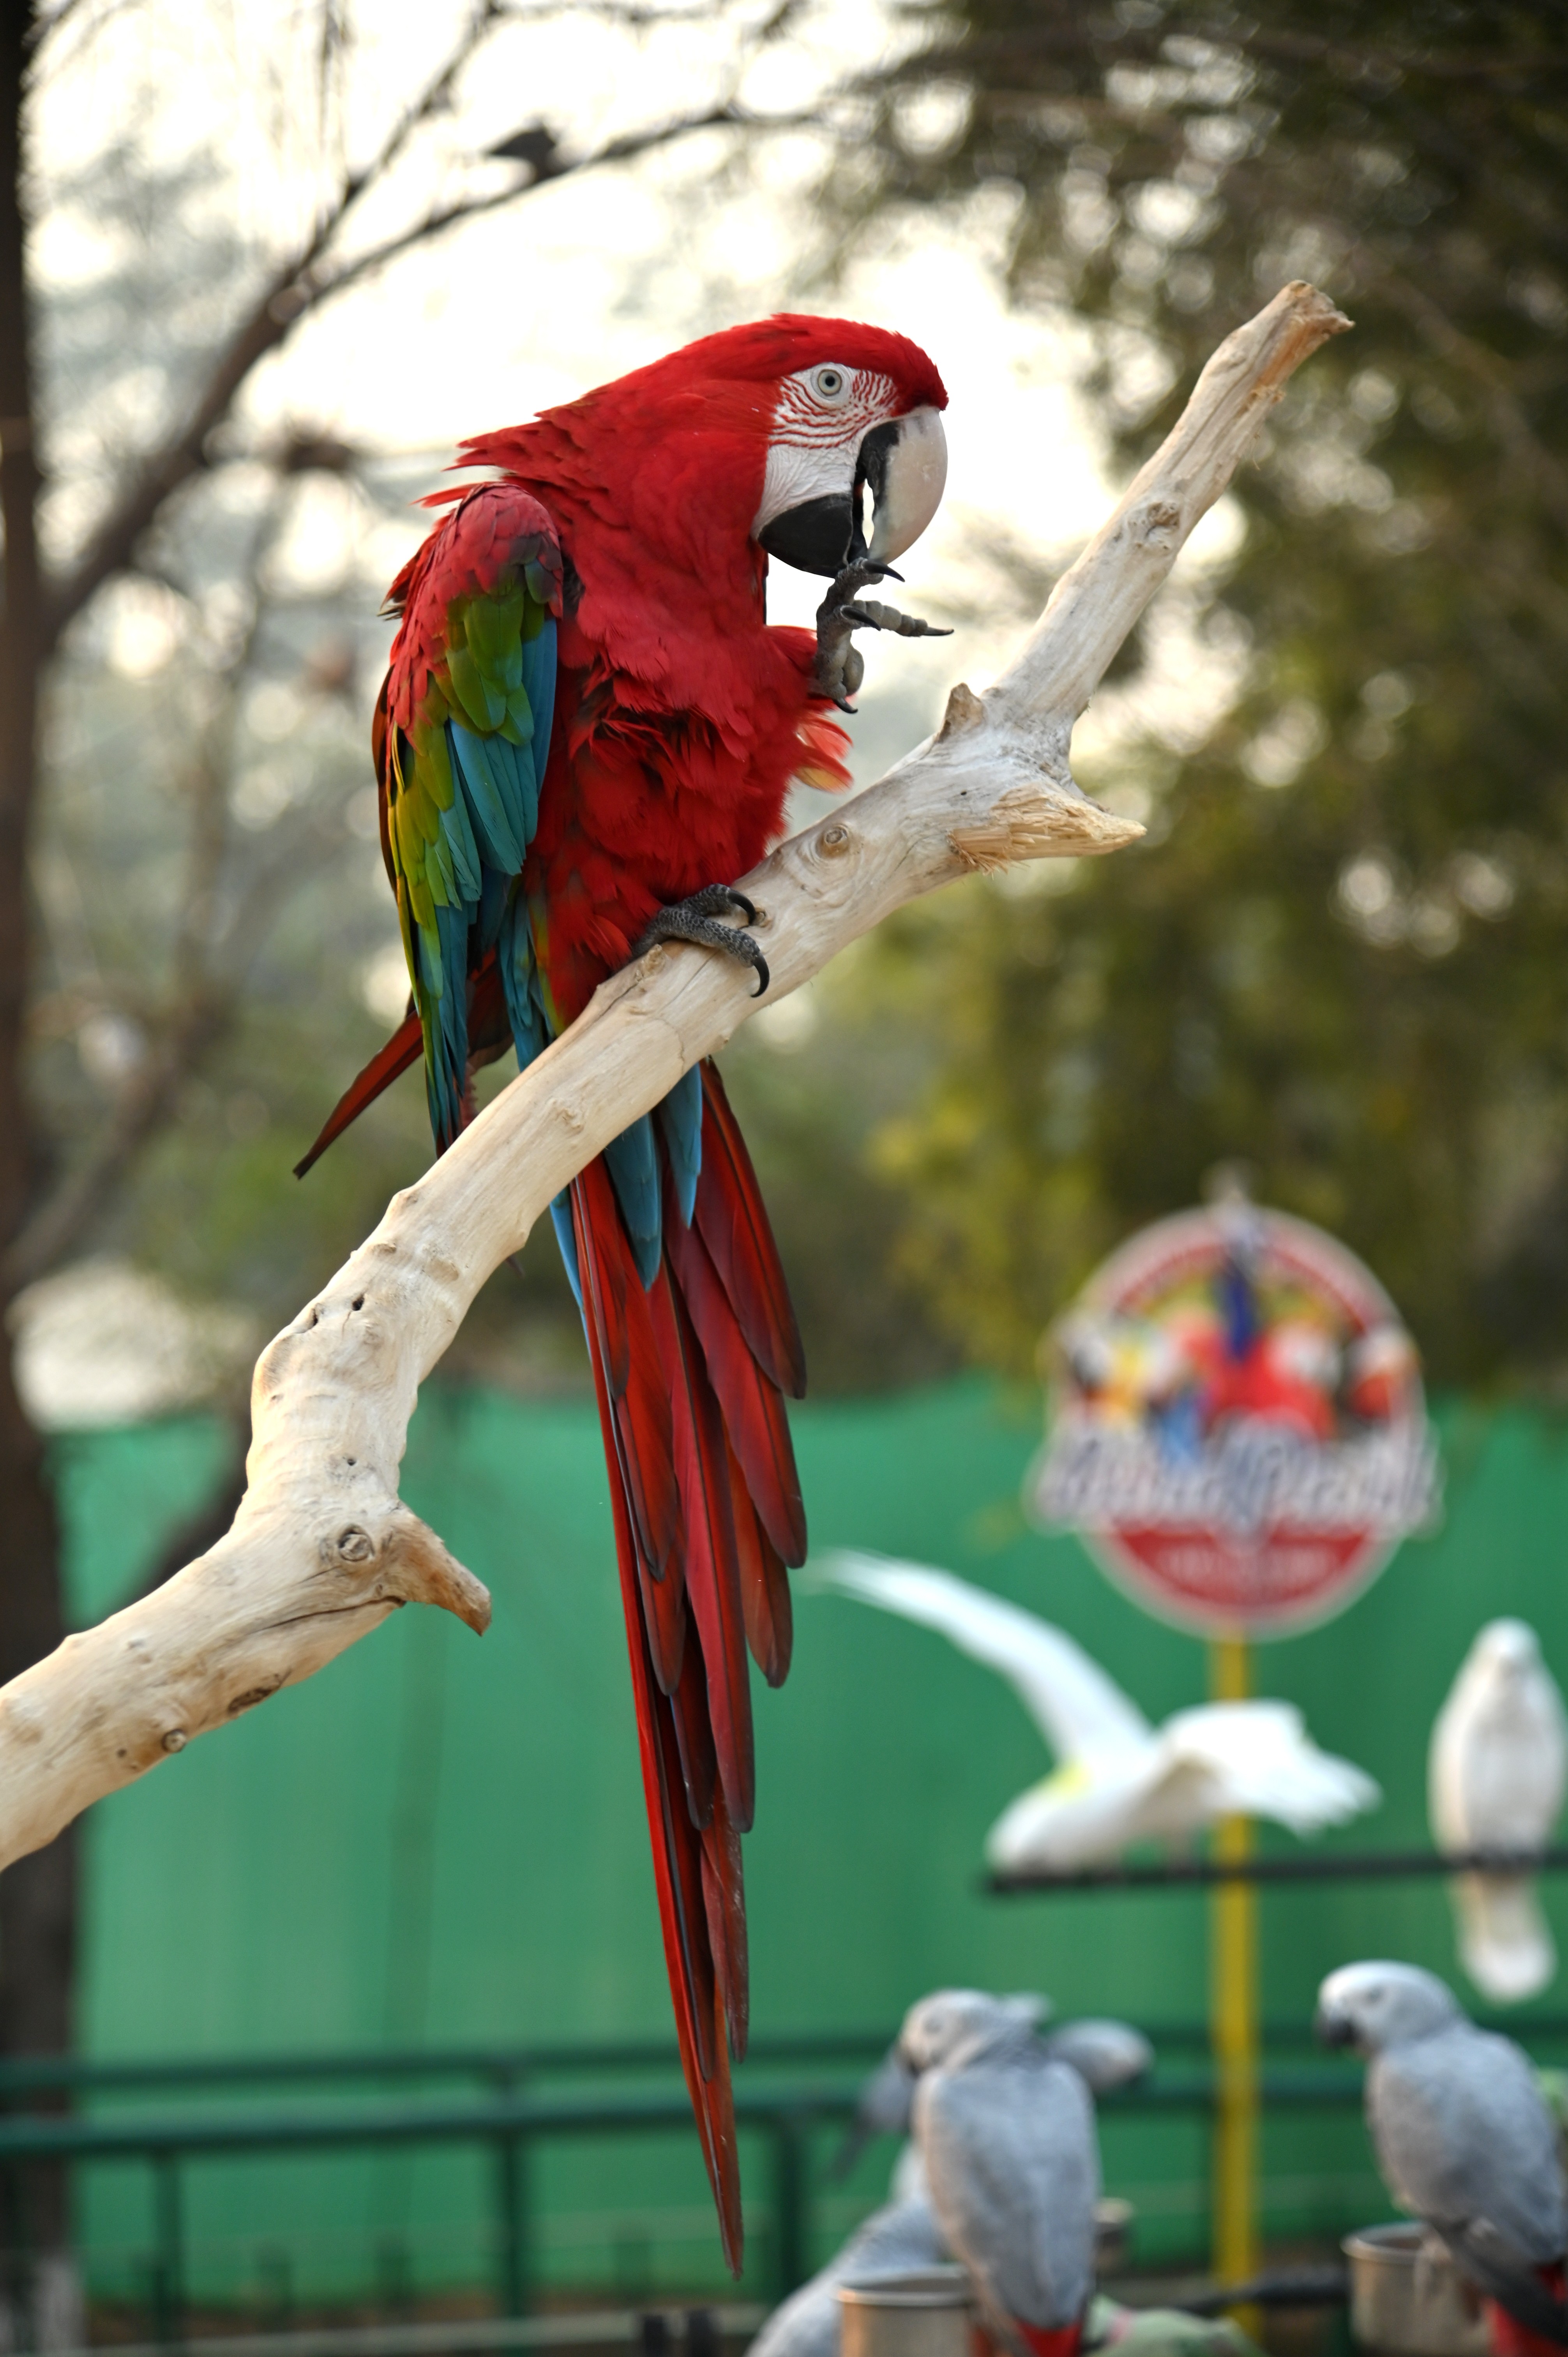 The Macaw Parrot